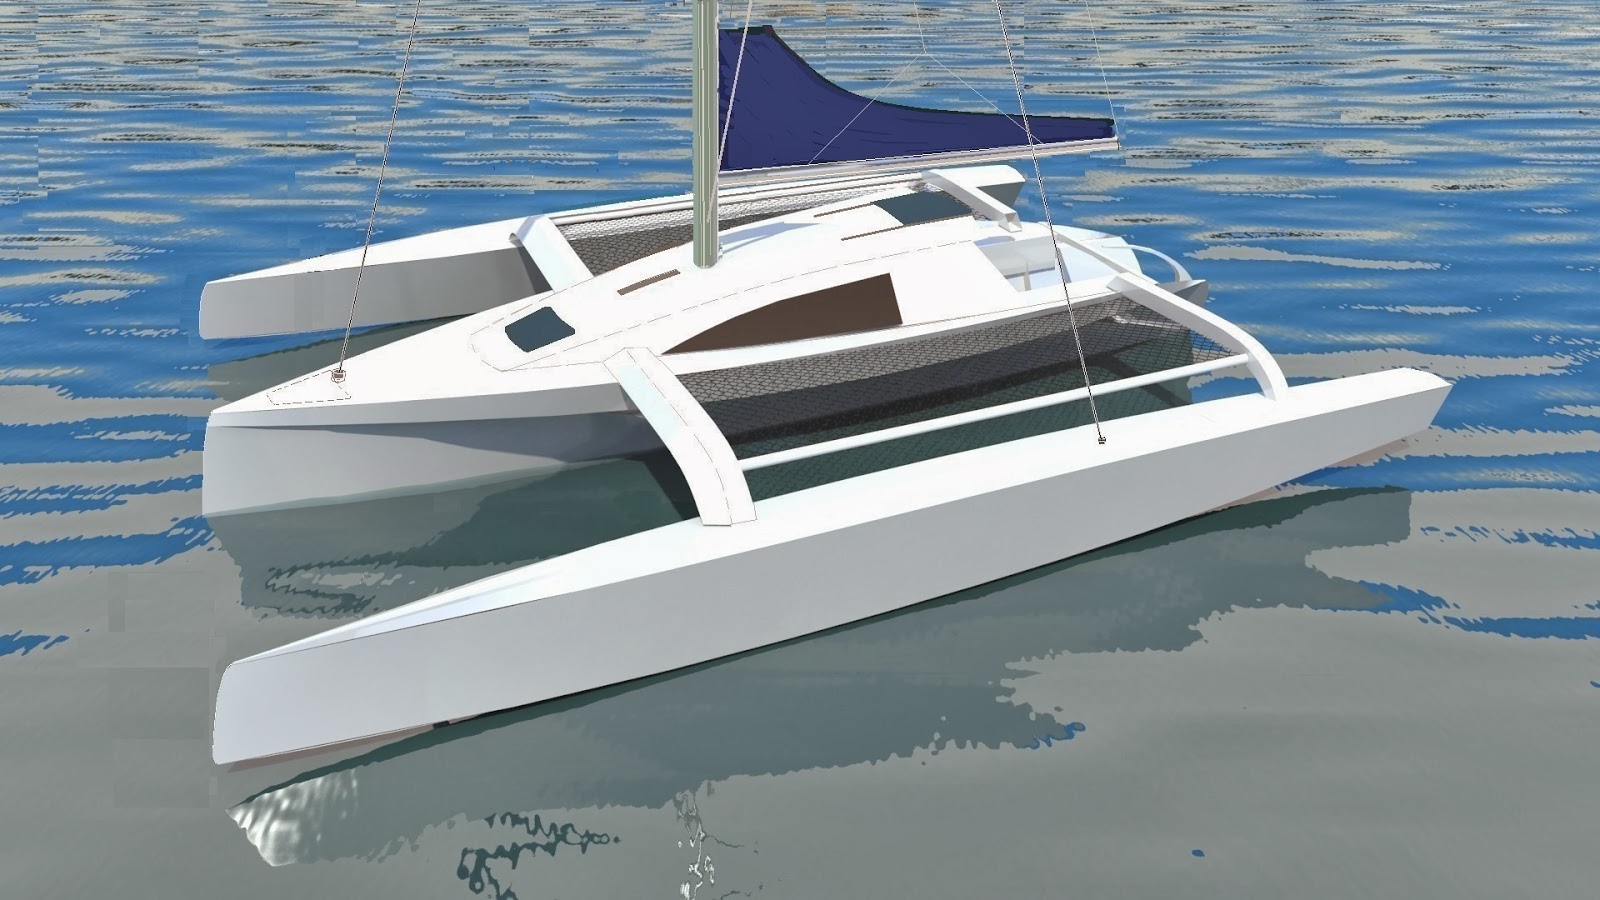 Trimaran Projects and Multihull News: January 2014